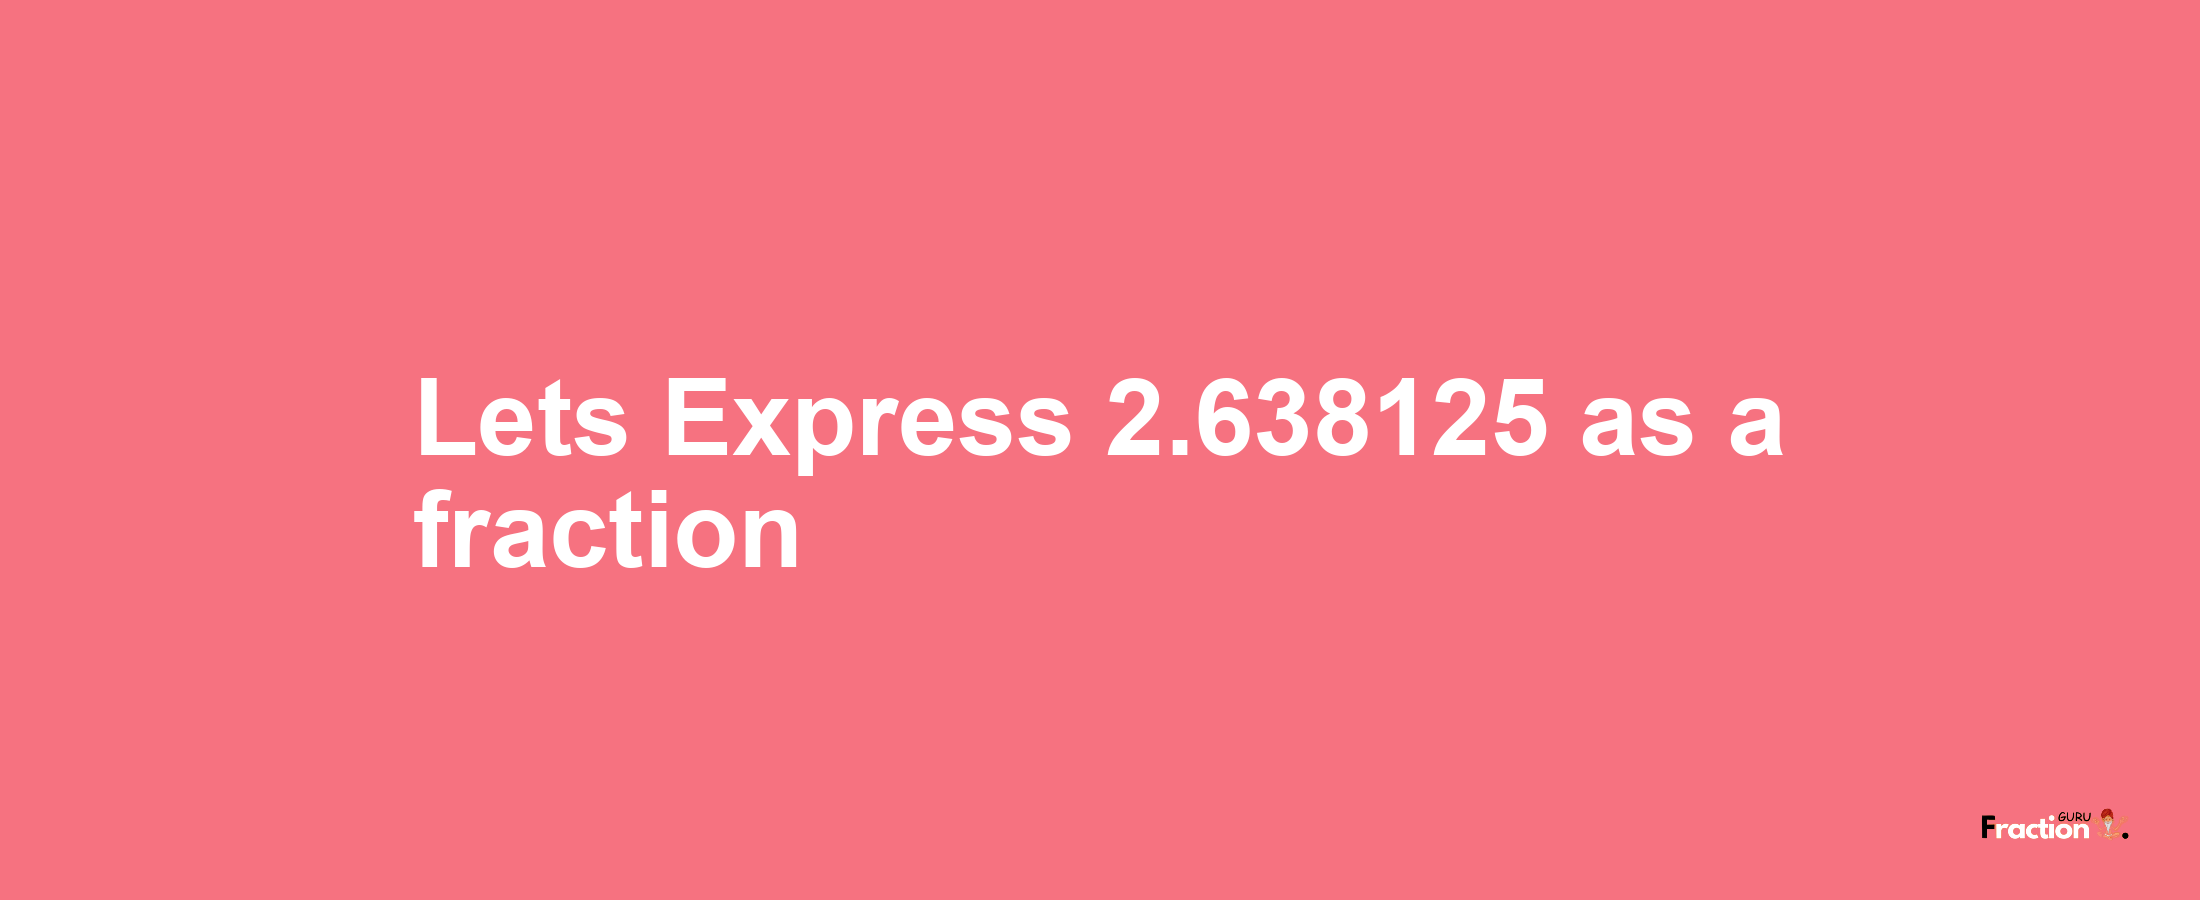 Lets Express 2.638125 as afraction